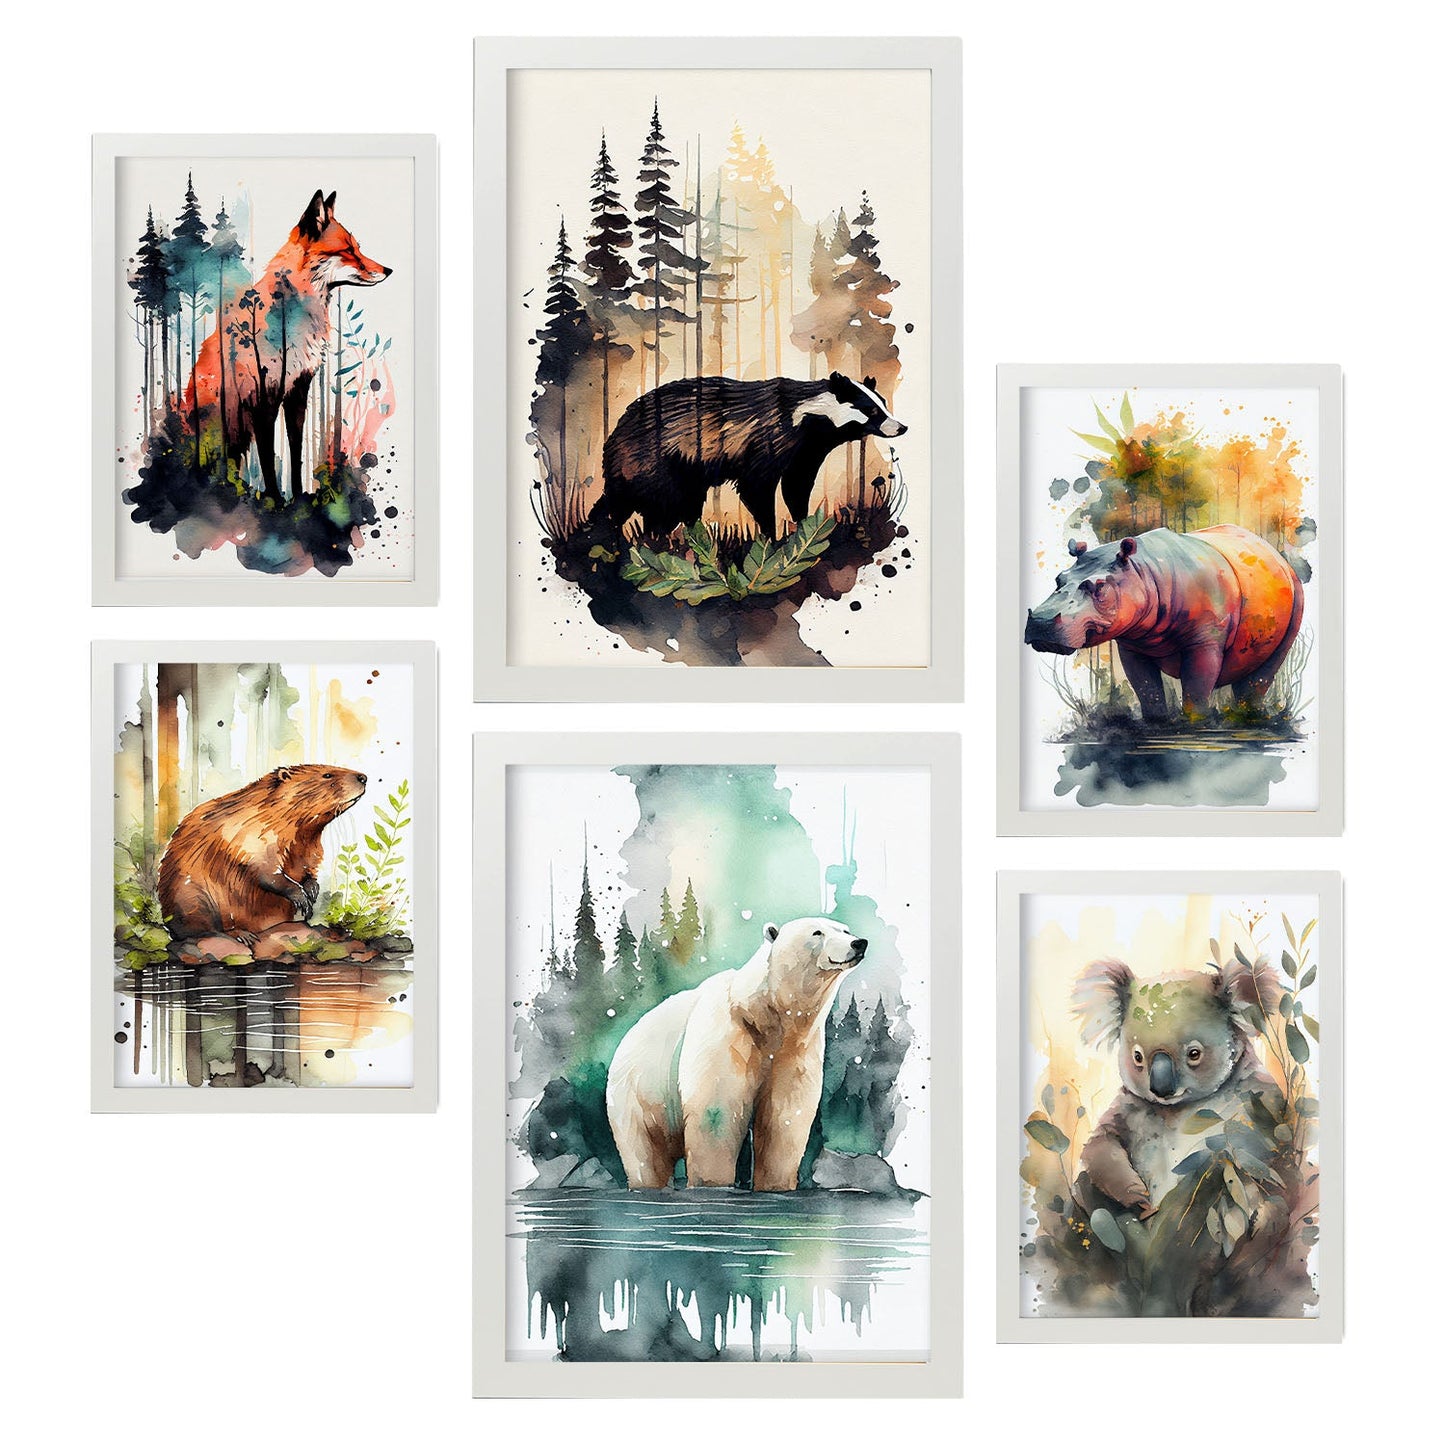 Nacnic Watercolor Animal Set_4. Aesthetic Wall Art Prints for Bedroom or Living Room Design.